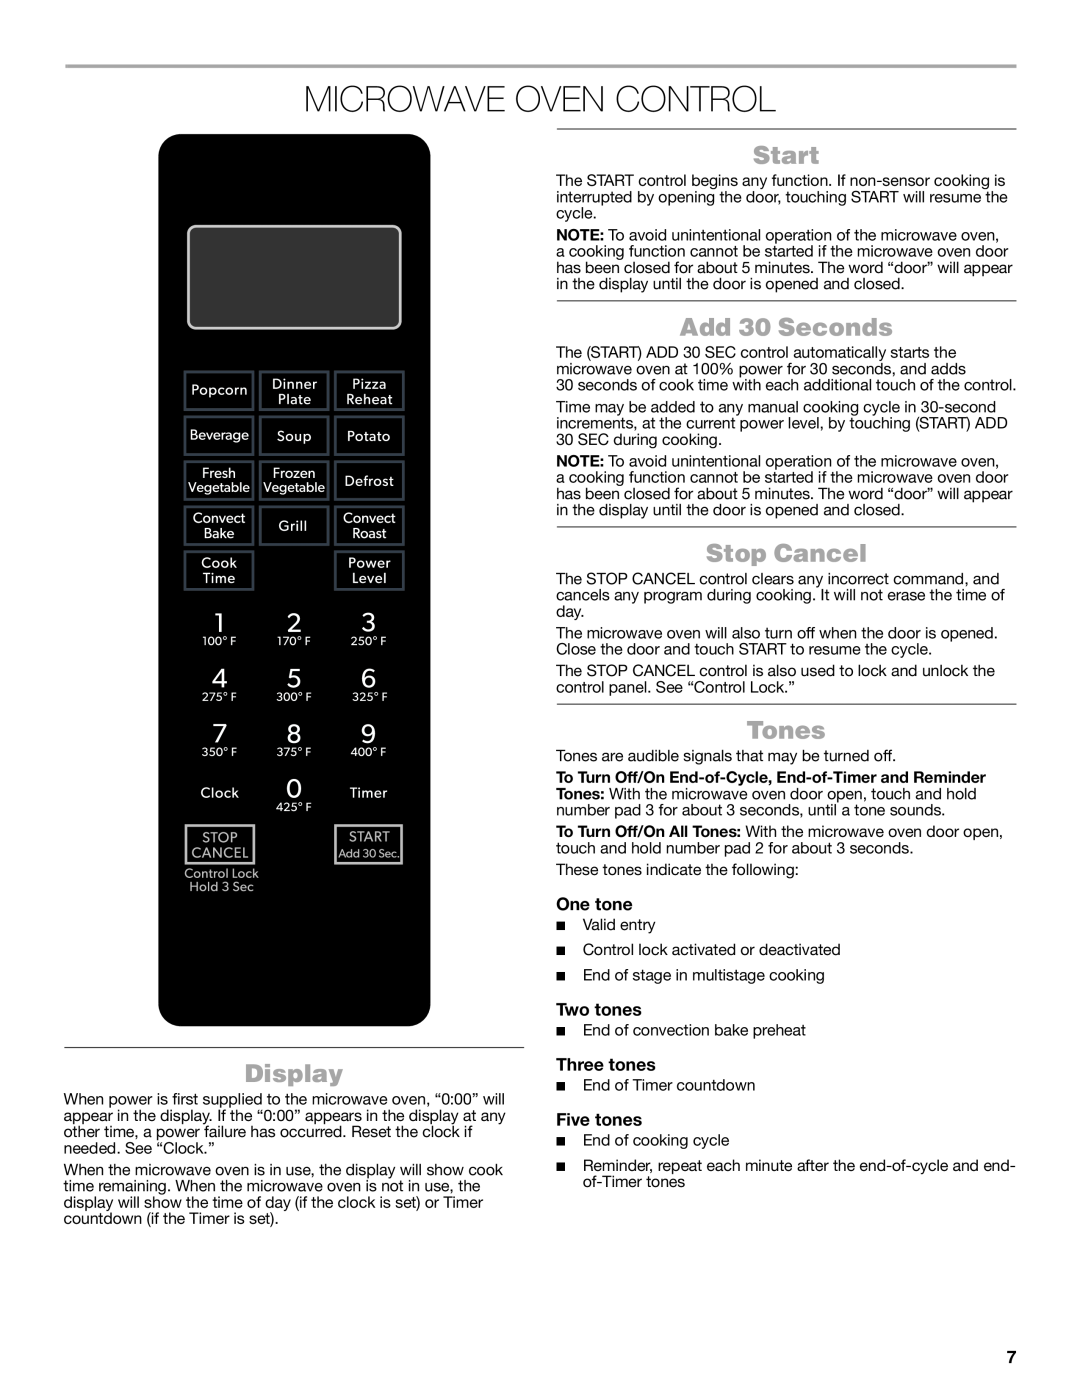 Jenn-Air W10491278A manual Microwave Oven Control, Start, Add 30 Seconds, Stop Cancel, Tones, Display, One tone, Two tones 